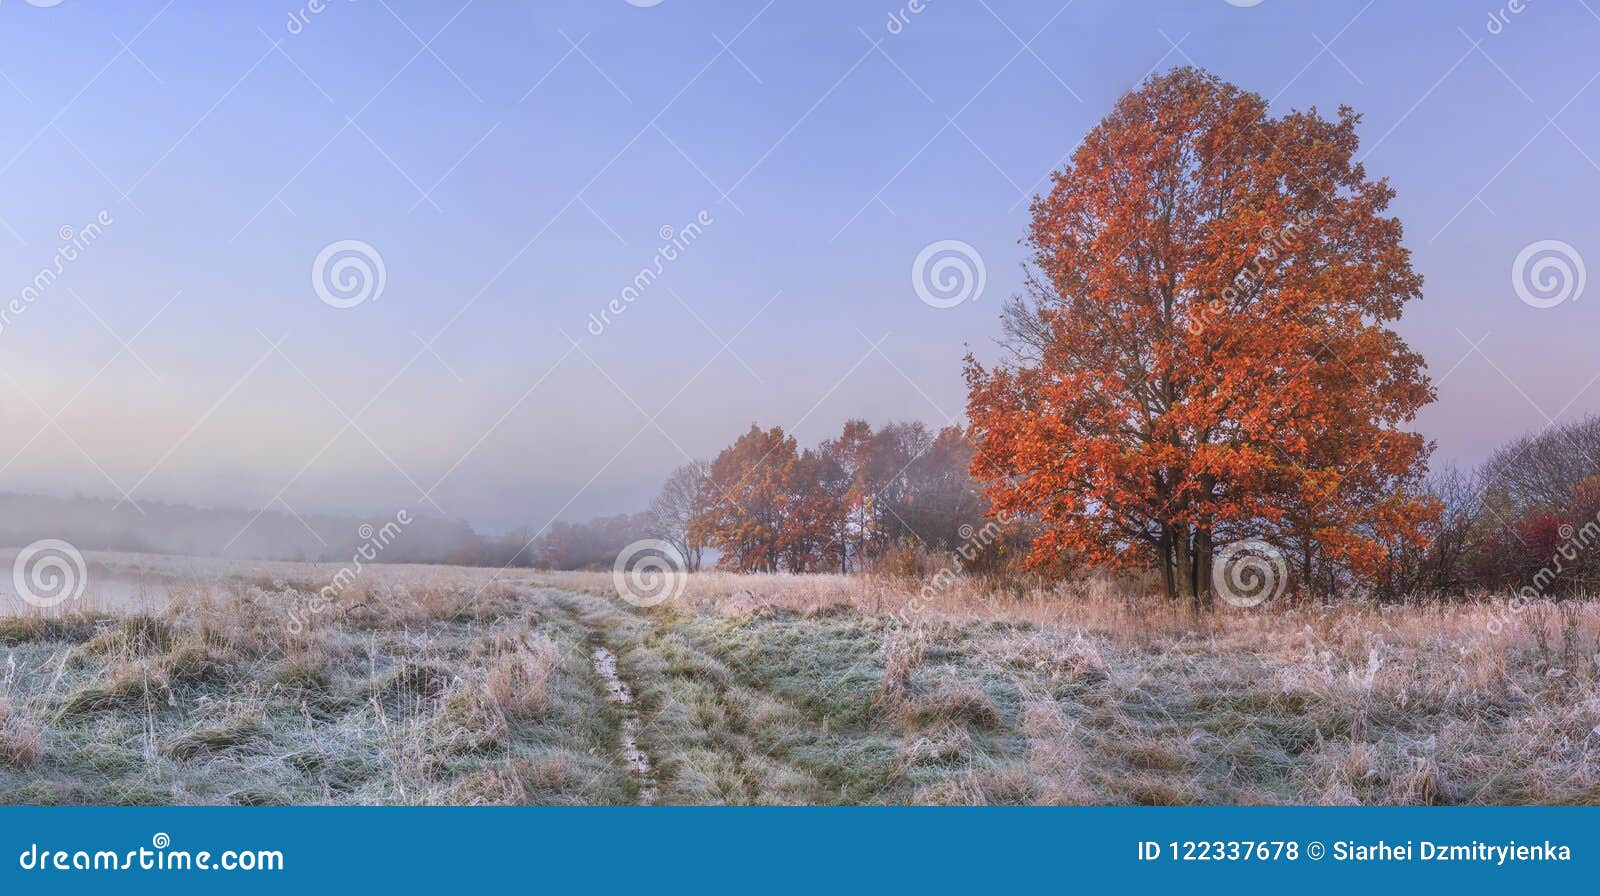 autumn nature landscape with clear sky and colored tree. cold meadow with hoarfrost on grass in november morning